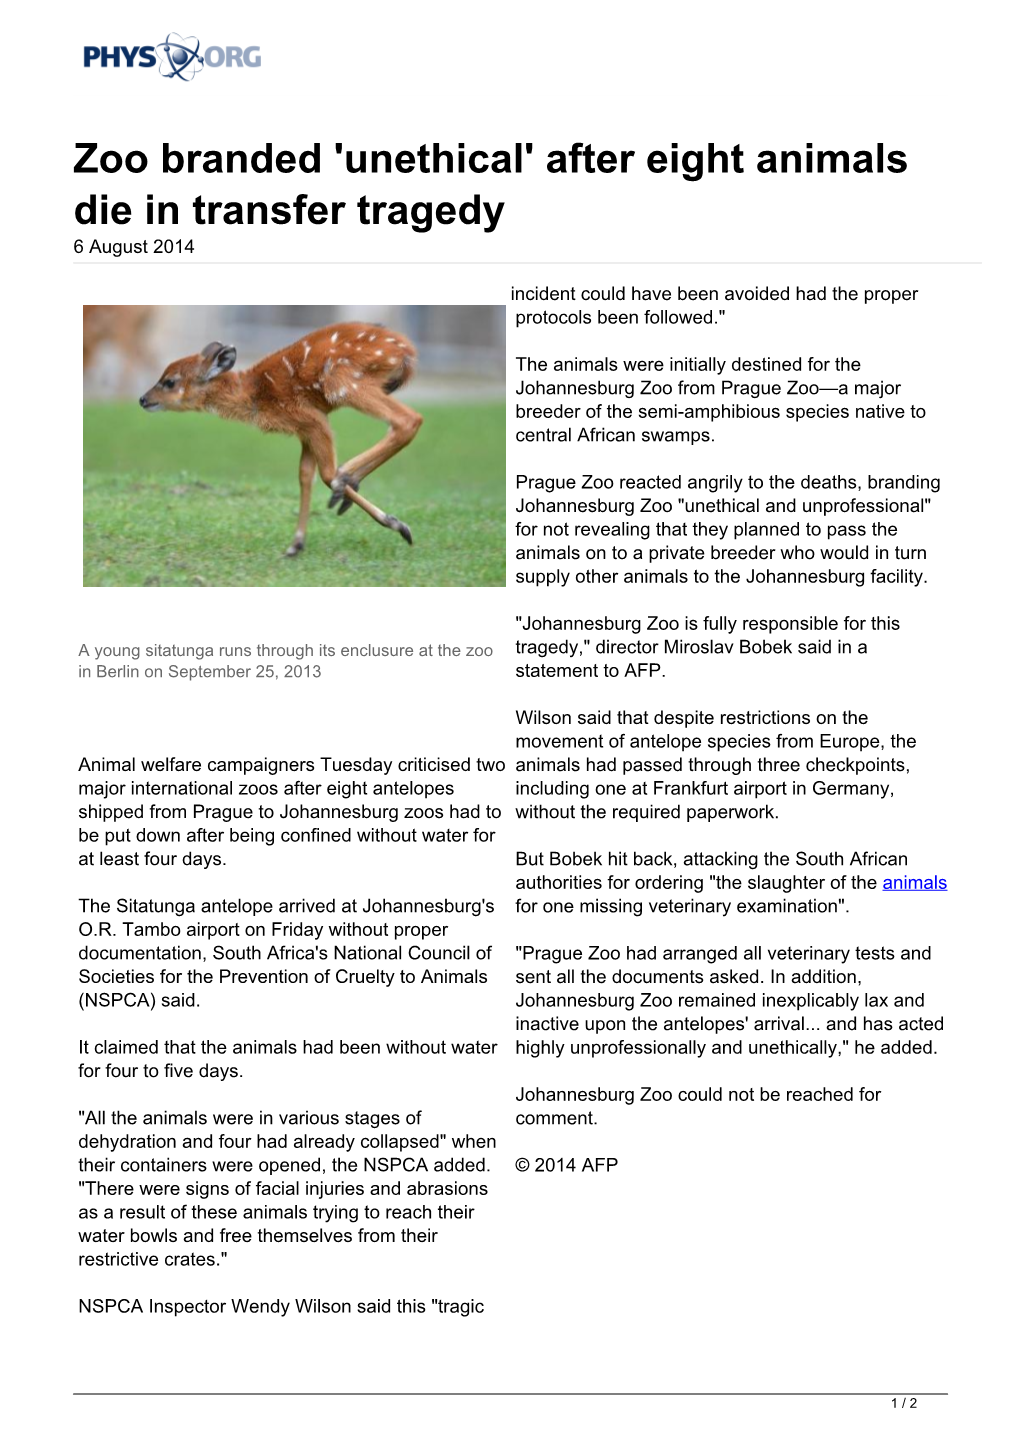 Zoo Branded 'Unethical' After Eight Animals Die in Transfer Tragedy 6 August 2014